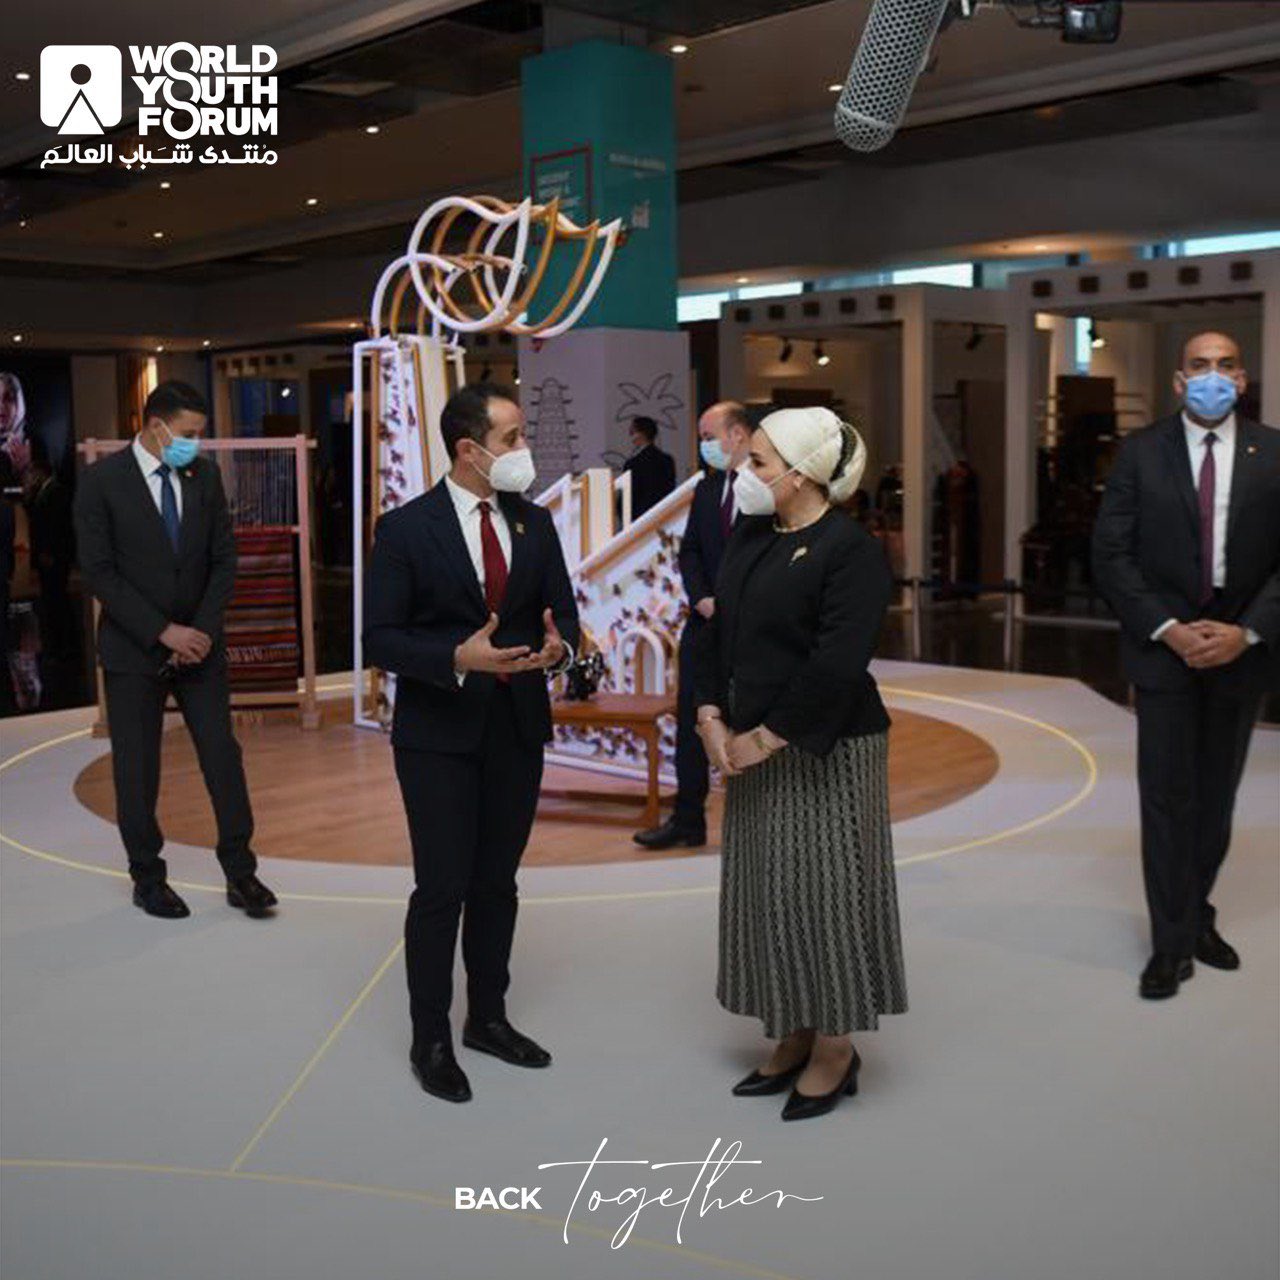 The presence of Mrs. Intisar El-Sisi in the forum